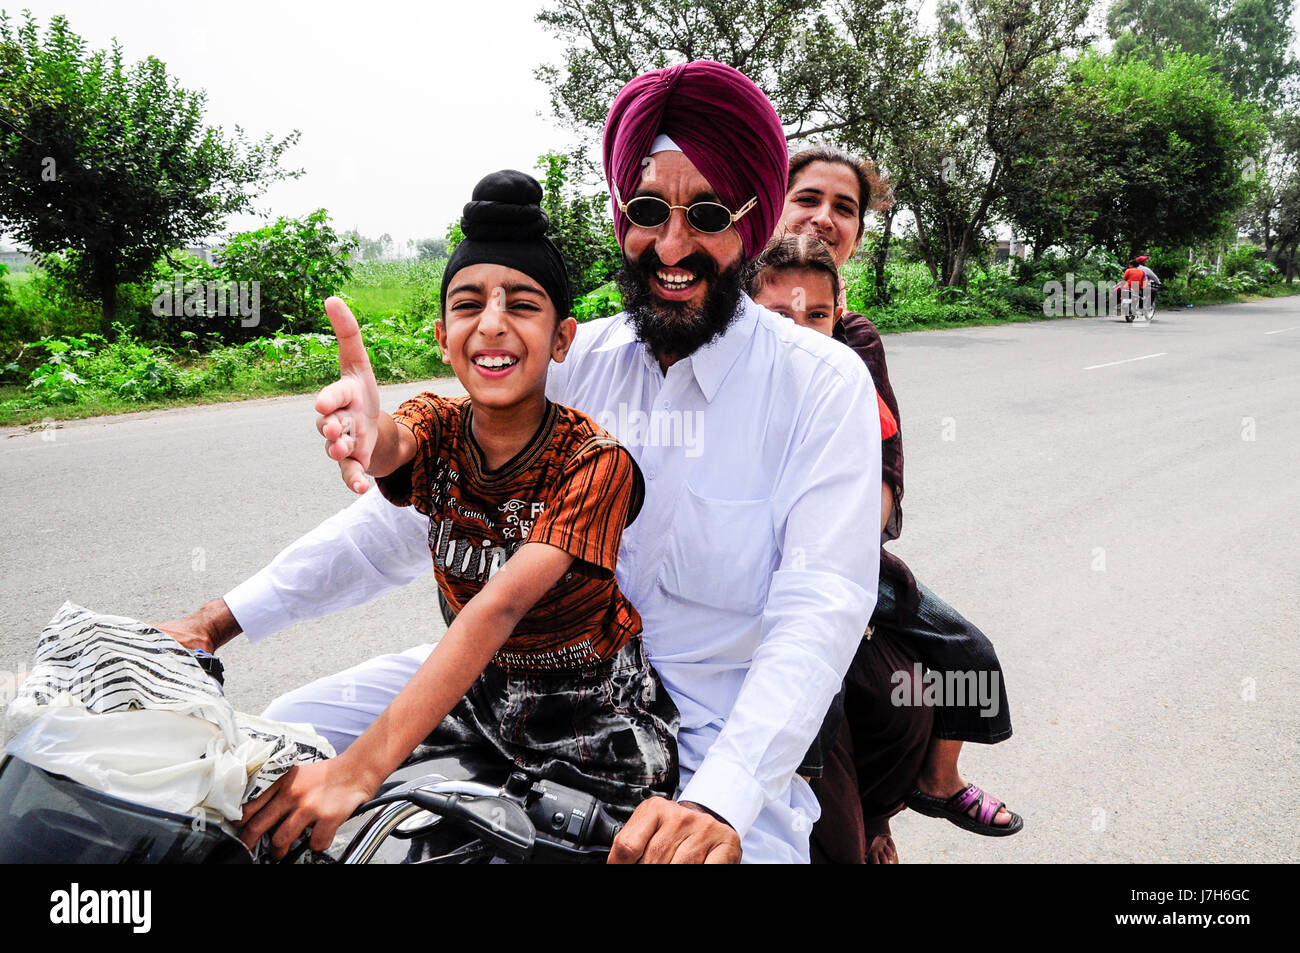 Amritsar, India, september 5, 2010: Sikh Indian family on a motorcycle with son pulling out his hand. Stock Photo